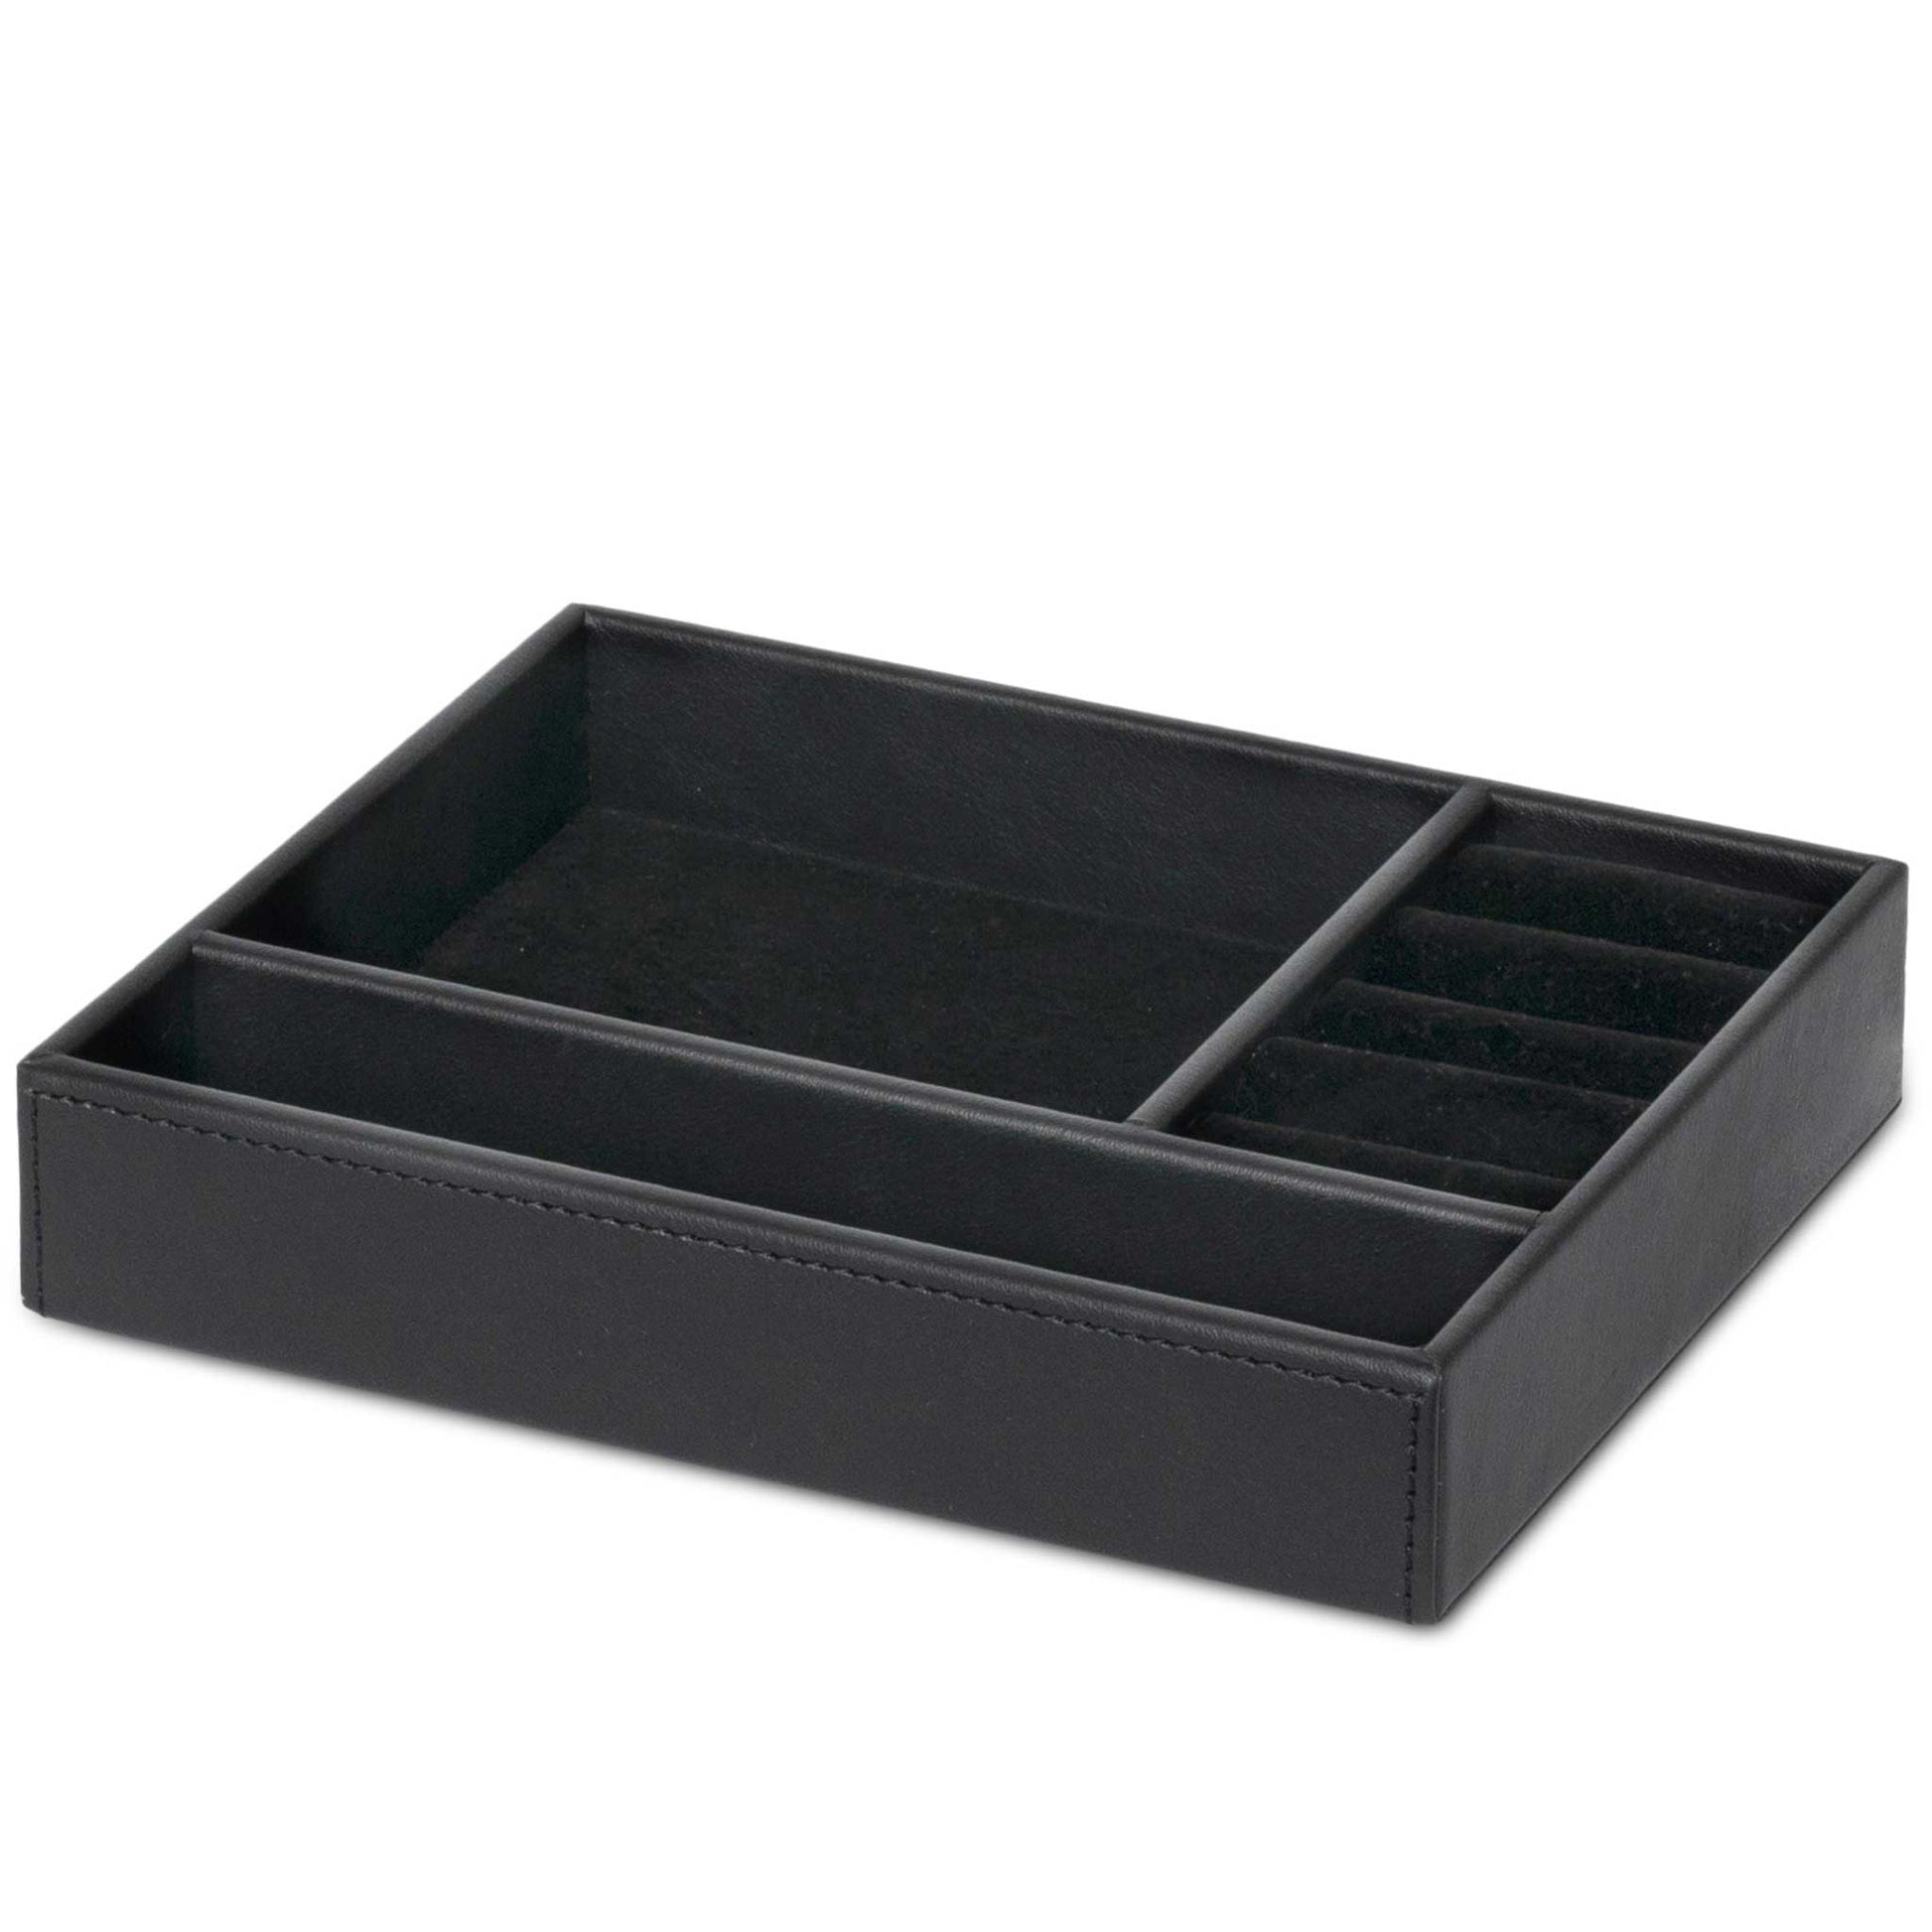 Bentley Andros black jewellery tray with jewellery cushions viewed from an angle